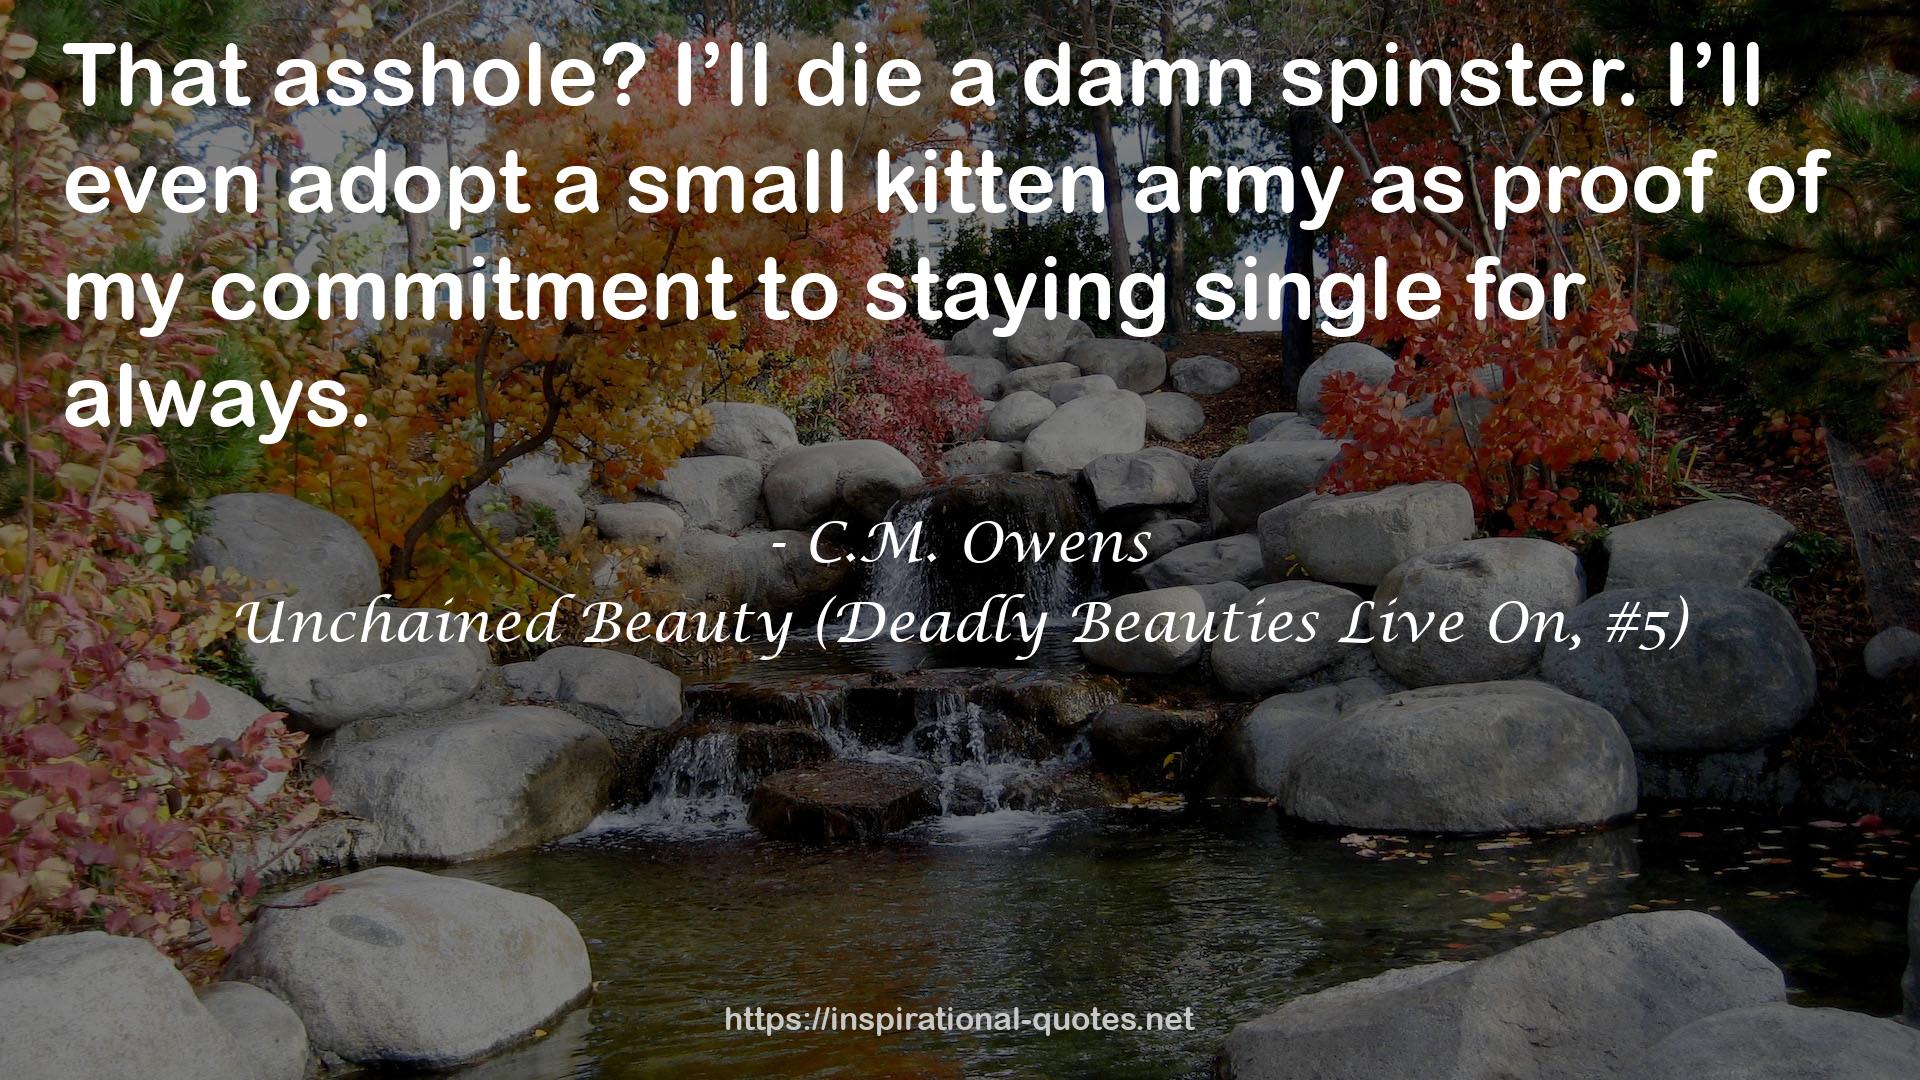 Unchained Beauty (Deadly Beauties Live On, #5) QUOTES